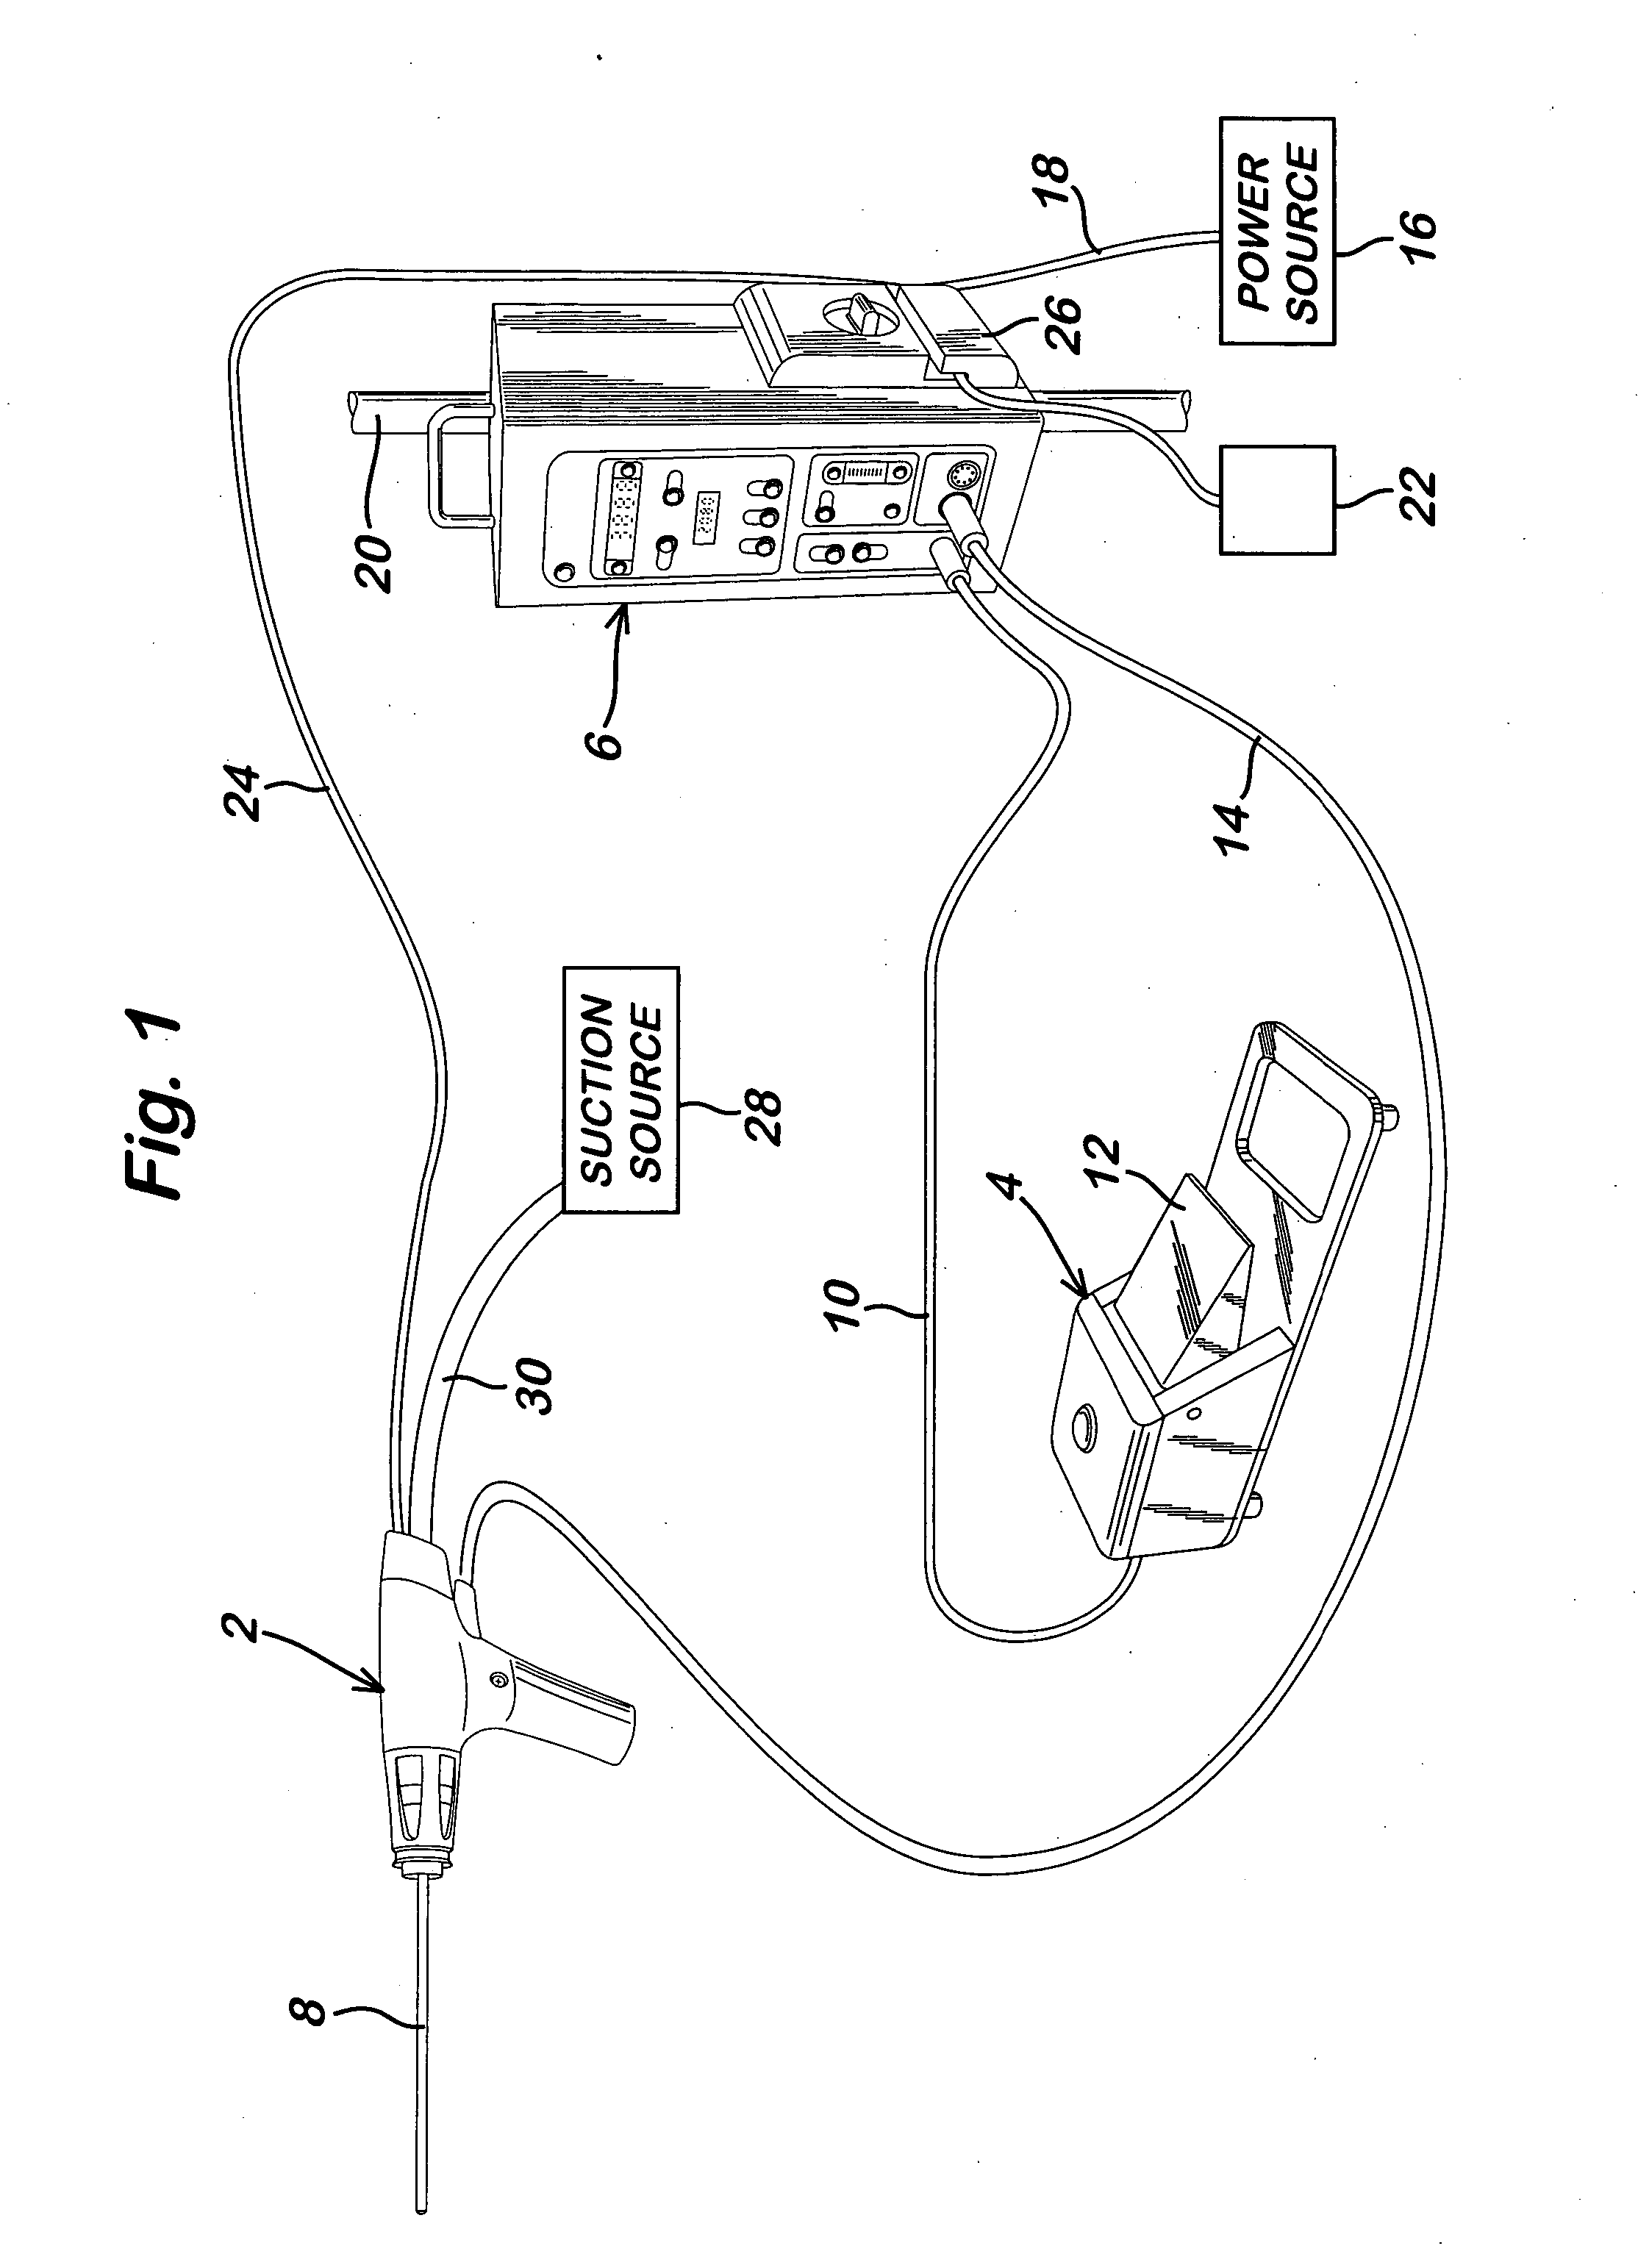 Powered surgical apparatus, method of manufacturing powered surgical apparatus, and method of using powered surgical apparatus